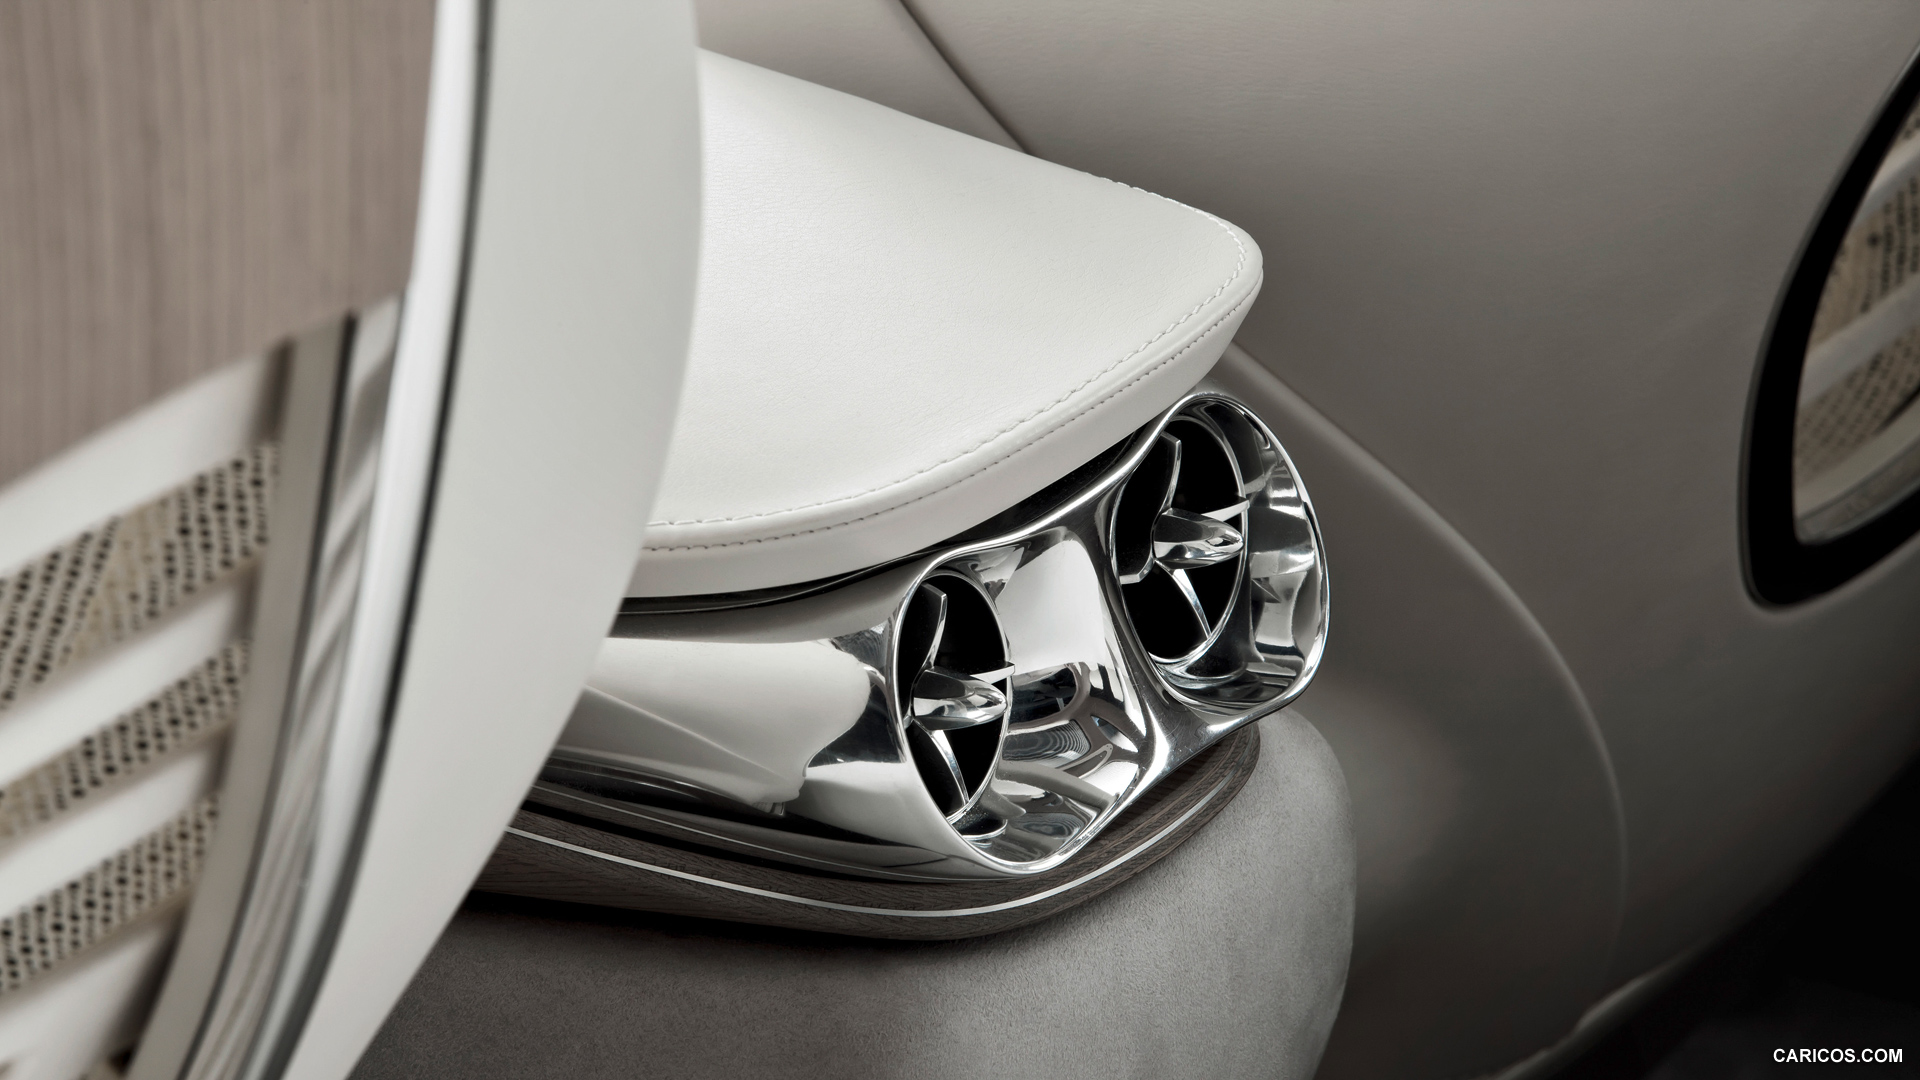 Mercedes-Benz F800 Style Concept (2010)  - Interior, Close-up, #65 of 120